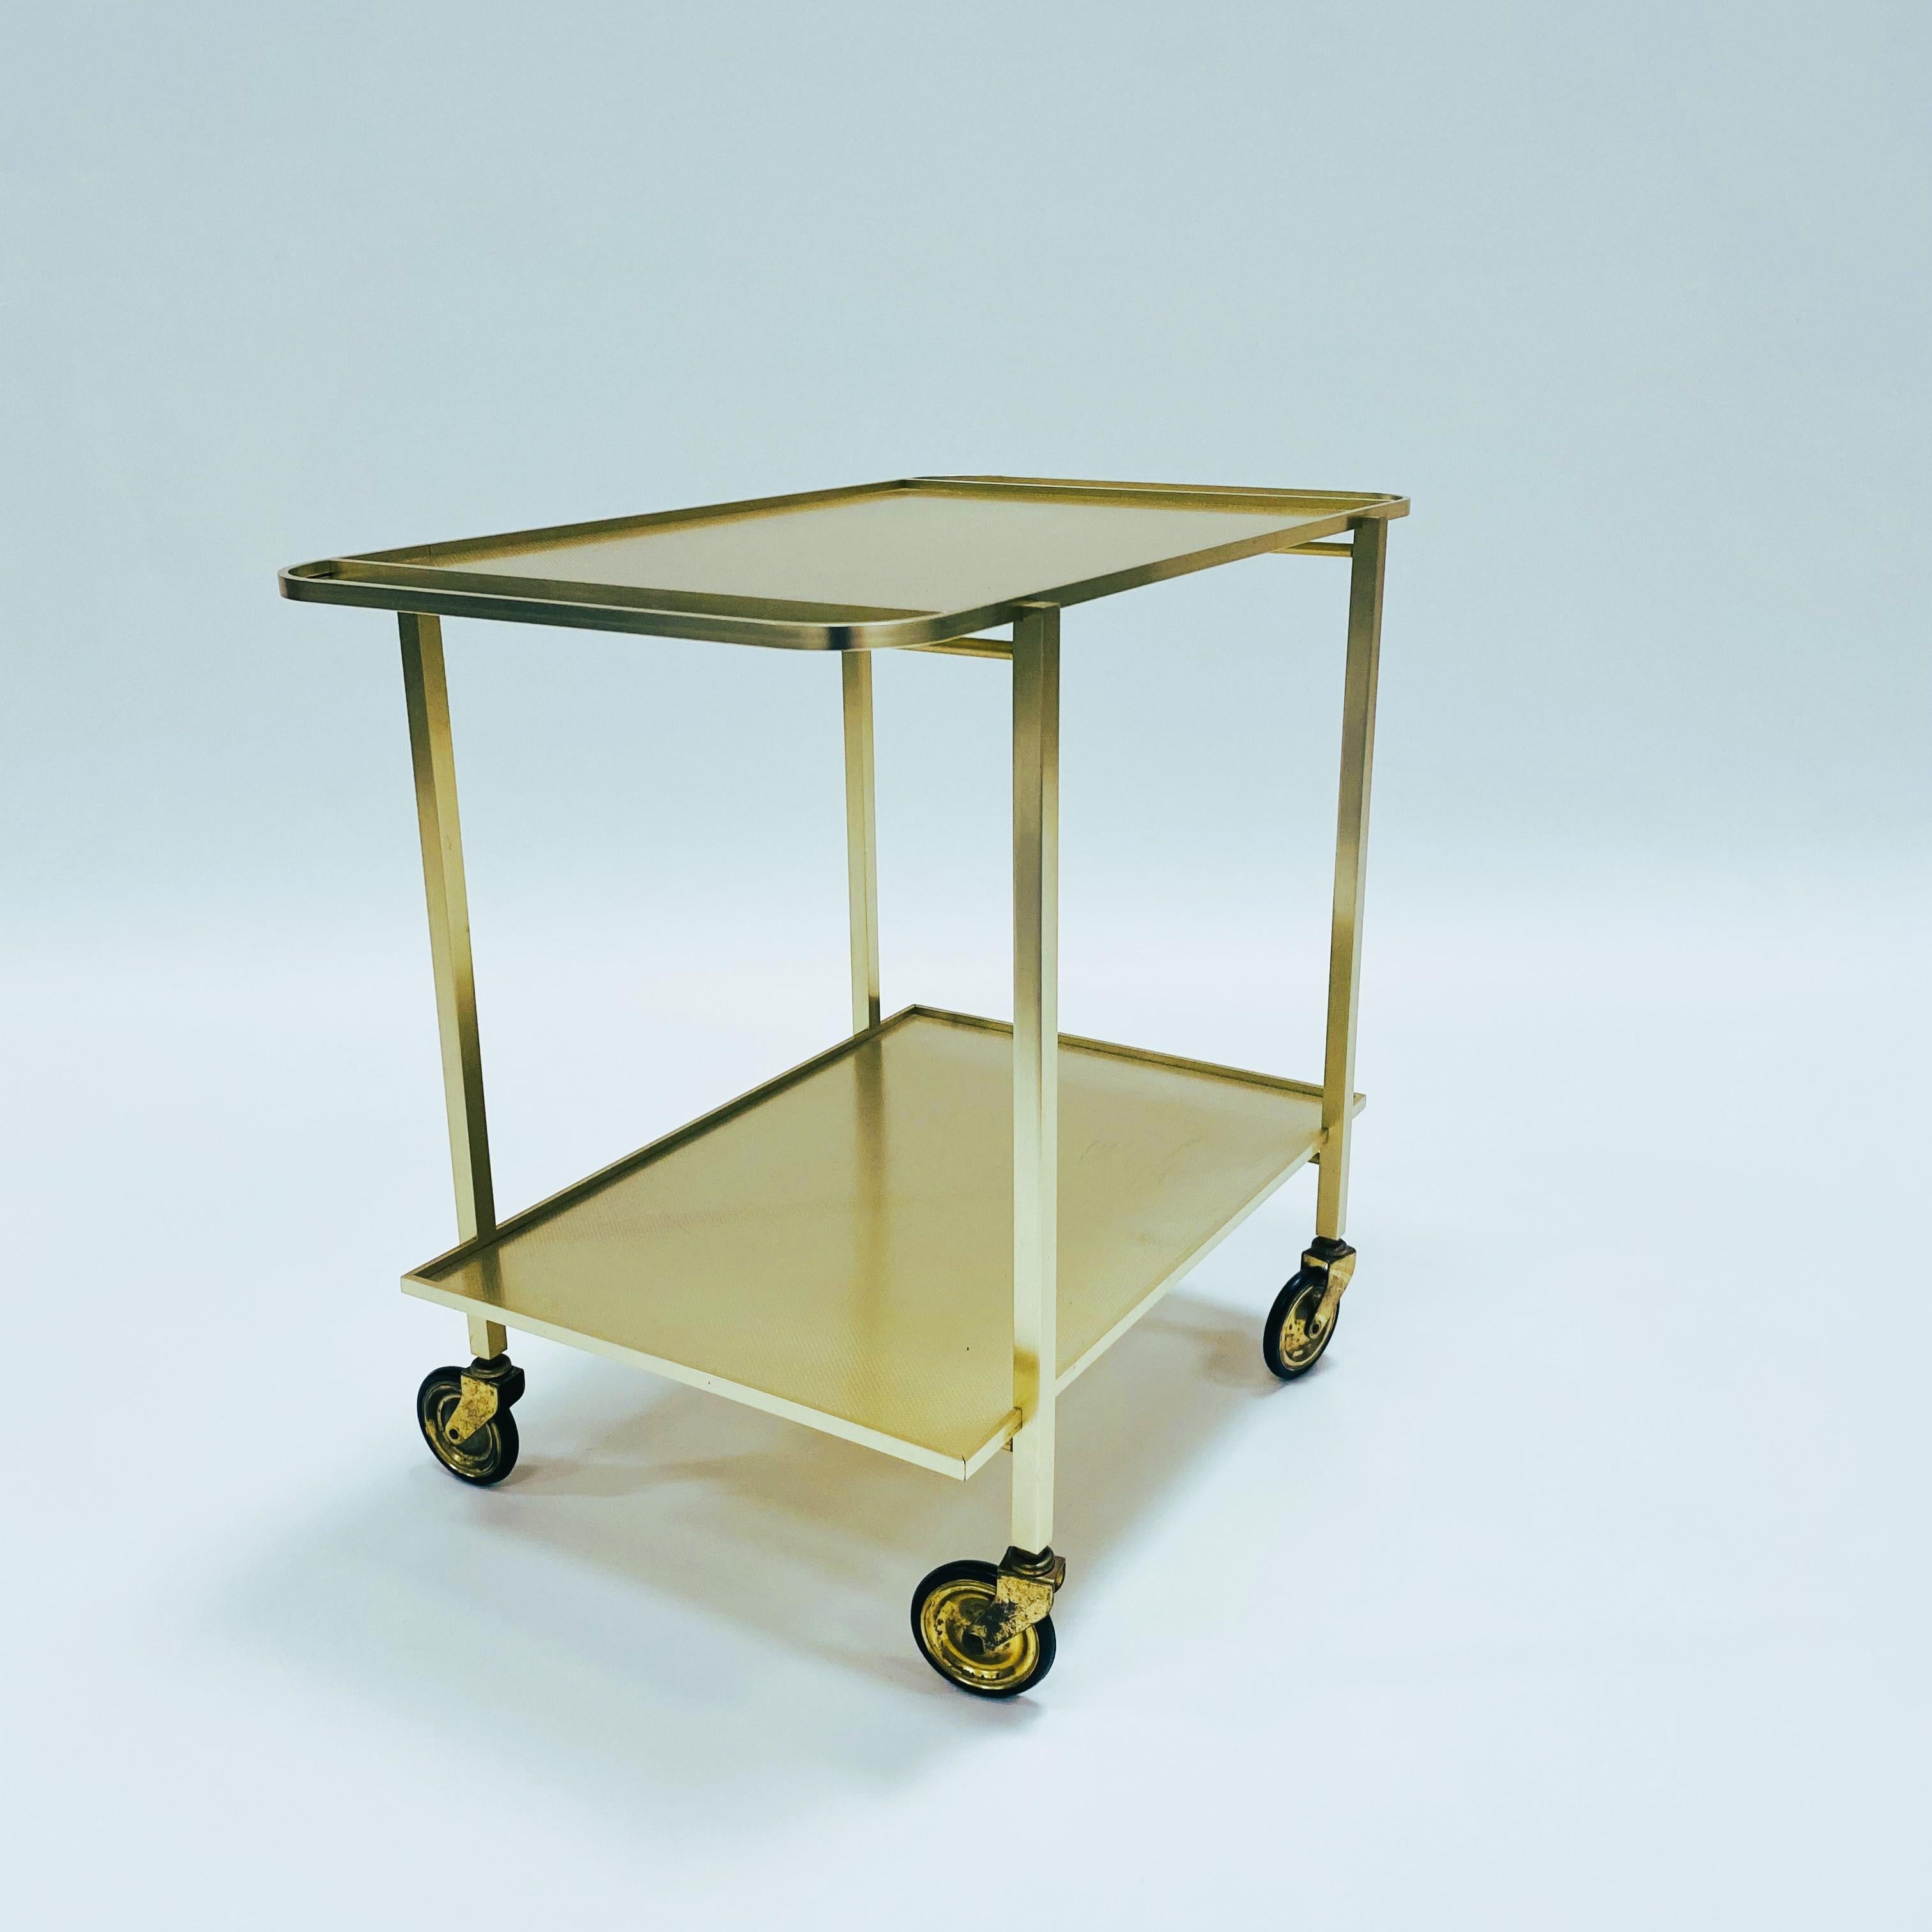 Swiss Gold Aluminum Bar Trolley by Werkenswurf Sihlmetall, Zwitserland, 1970s For Sale